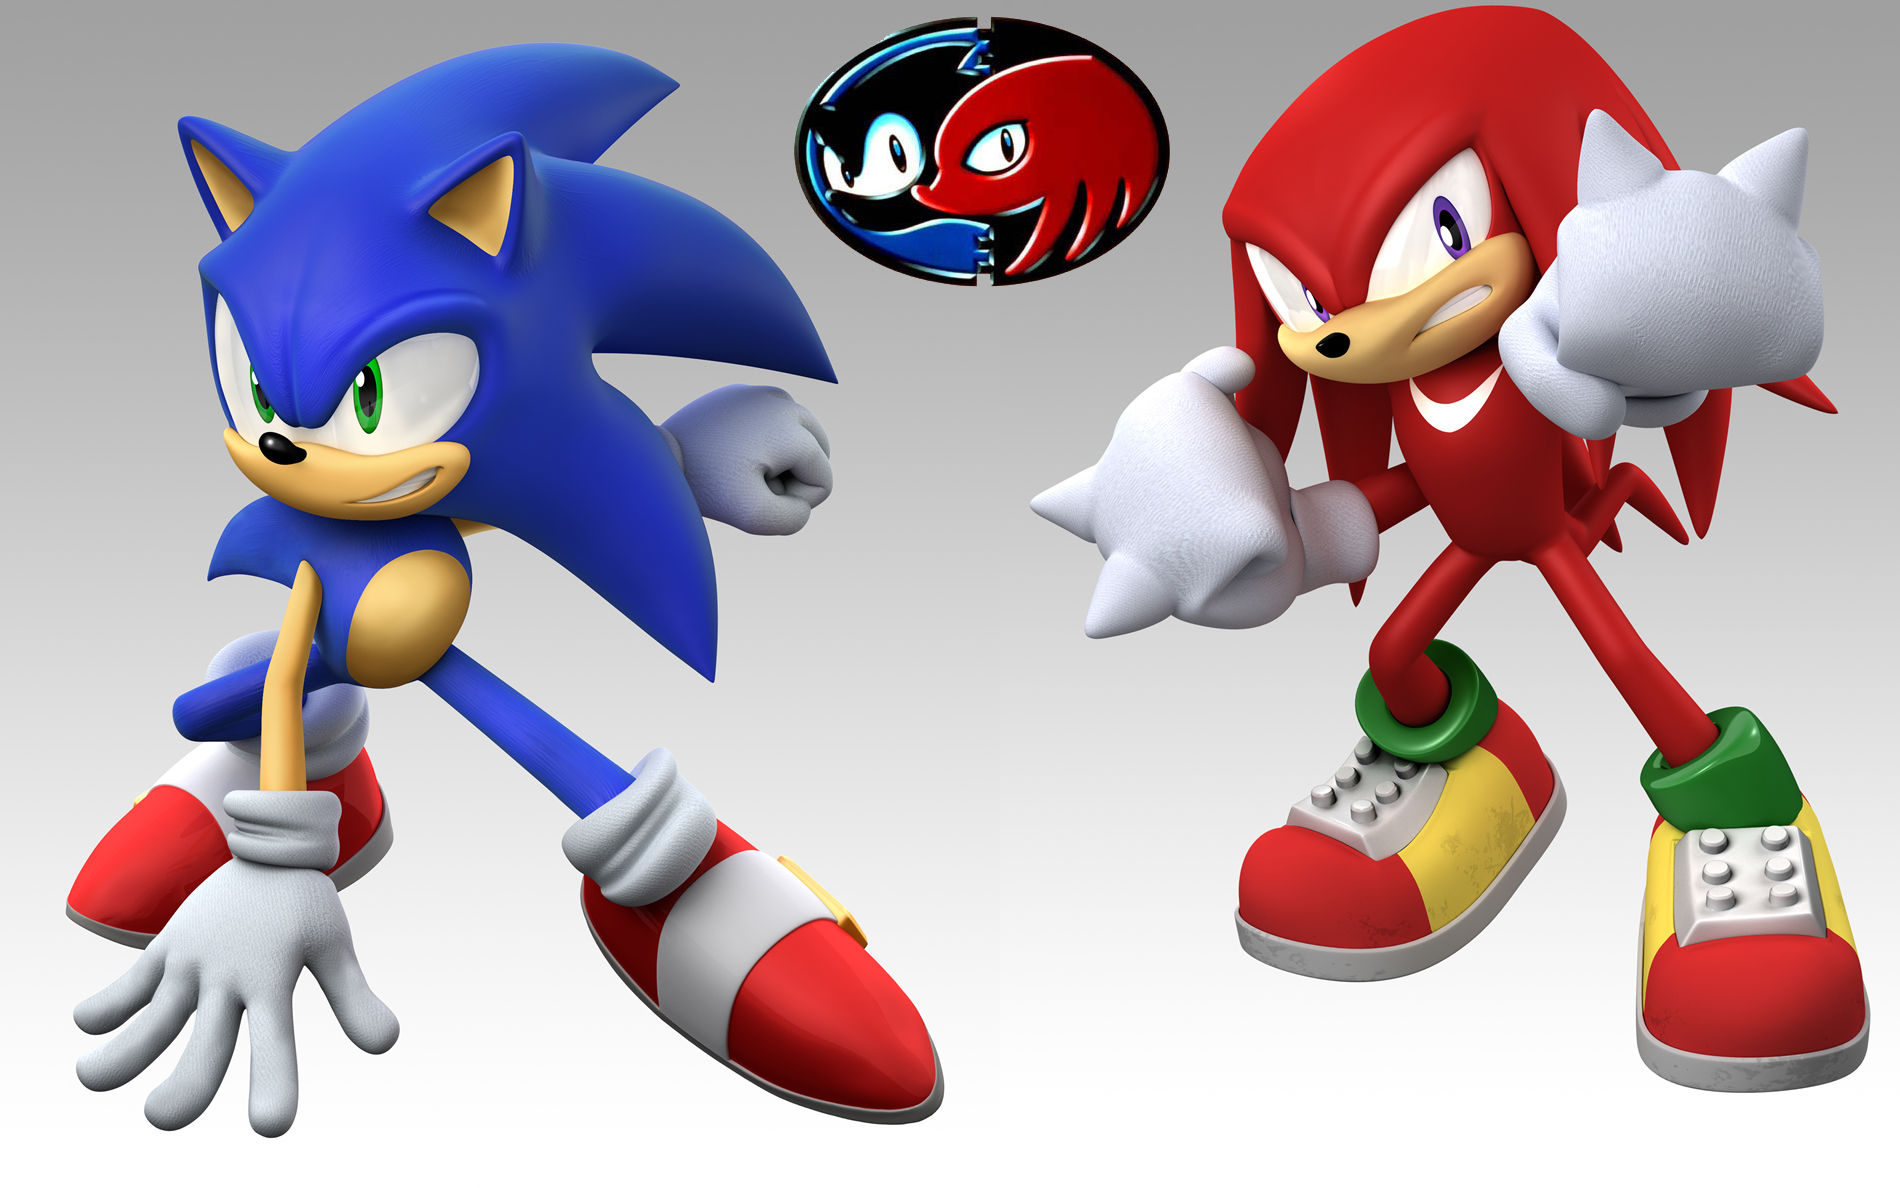 Sonic_and_Knuckles_by_MegaRed.jpg